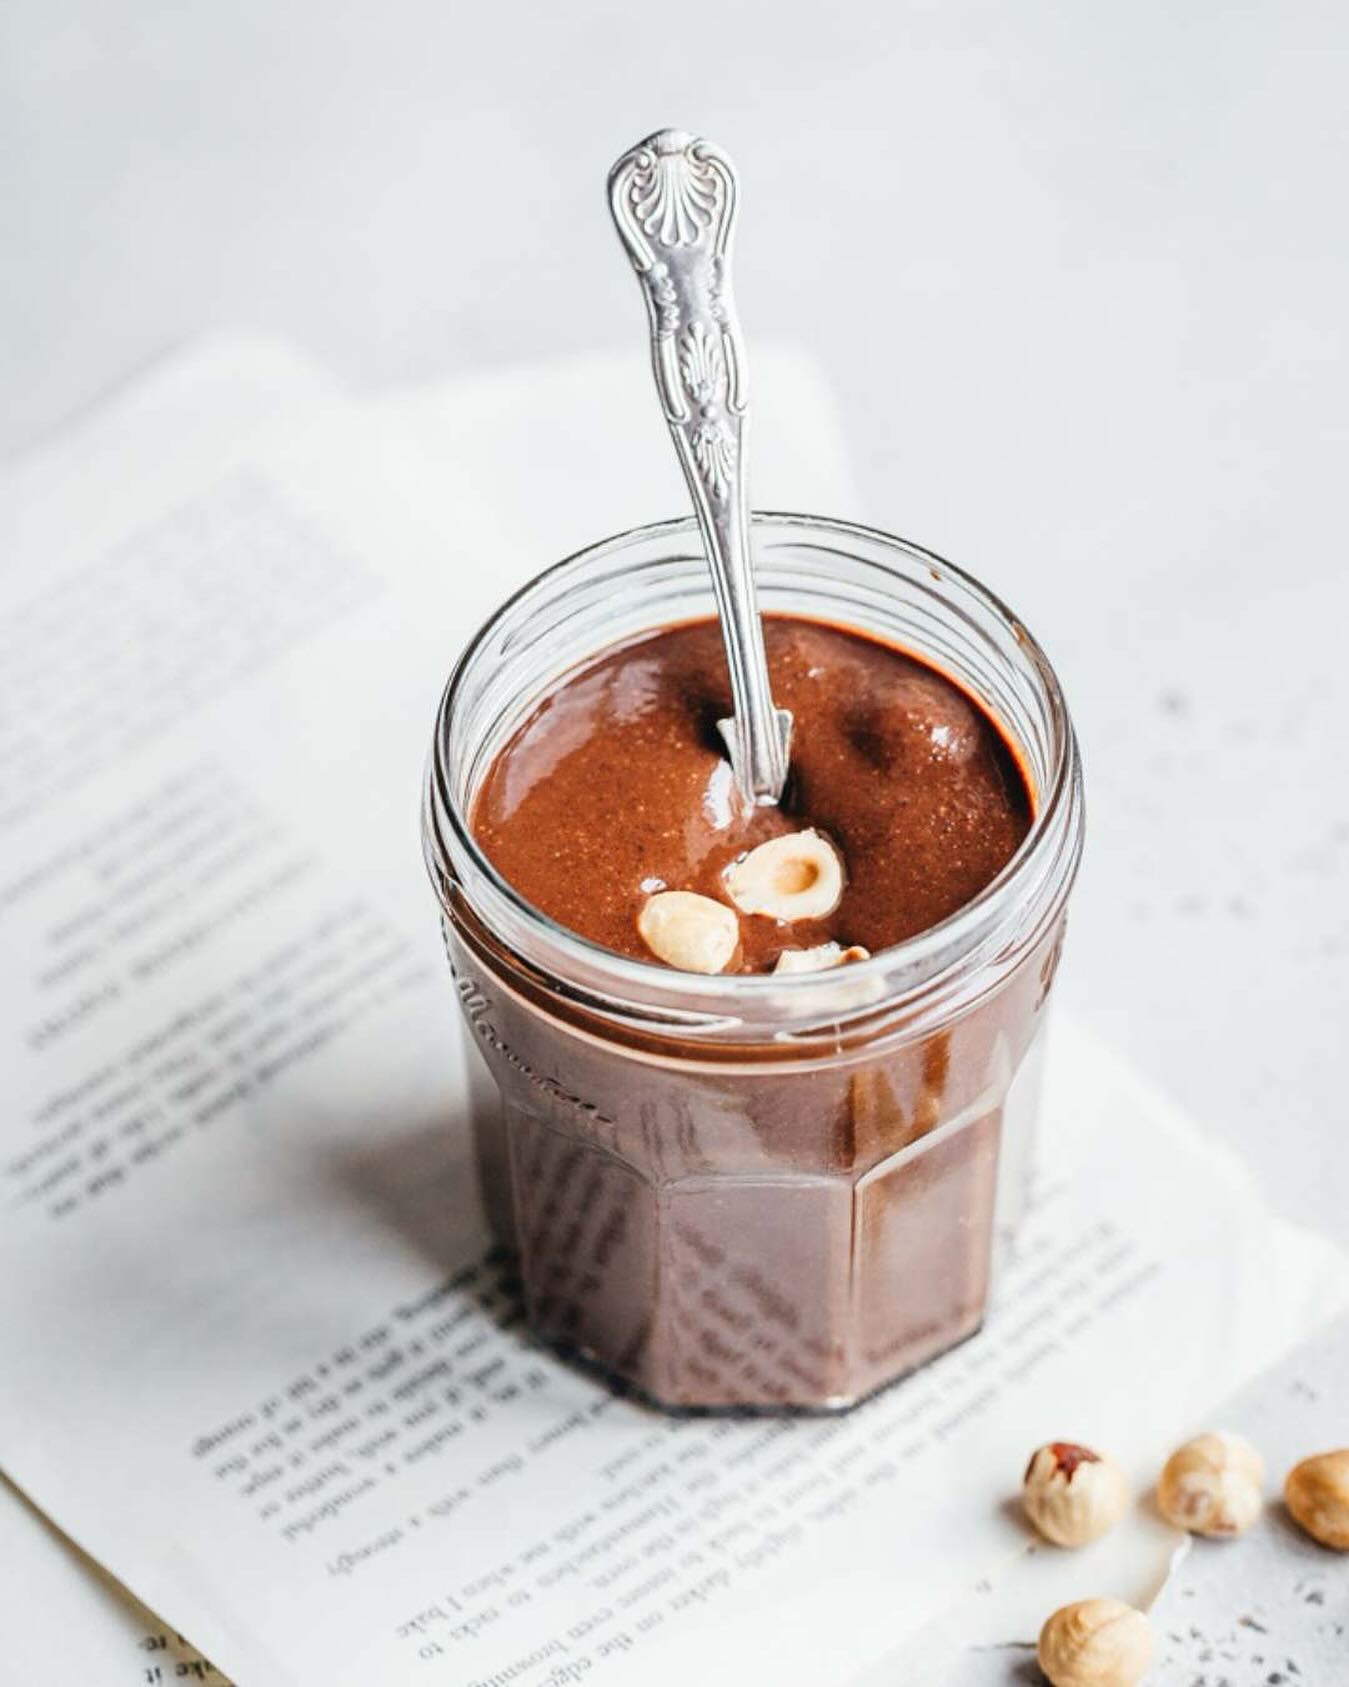 We love the term “Culinary Consciousness”. 2024 is all about taking back control of what goes into our bodies. Let’s start with chocolate spread; did you know that most ready made chocolate spreads contain less than 13% nuts? Our healthy Nutella boasts 48% hazelnuts and 9% cacao, so let’s beat store-bought ones 

Taking control of what goes into our indulgences is a great way to cut down on over-processed treats. Plus, high-quality hazelnuts and organic cacao powder can provide essential nutrients like antioxidants, fiber, and heart-healthy fats. This is a delicious and healthier alternative to store-bought options, with a higher nutritional value. Isn’t this a resolution worth savouring?

You will need:
250g whole skinless hazelnuts, roasted
🥥200g coconut sugar
45g organic cacao powder
🧂A pinch of salt
1 tsp vanilla extract
2 tbsp coconut oil

Place the freshly roasted hazelnuts in a food processor and blend for about 5 minutes. You may need to pause blending a couple of times to scrape the sides, but soon you’ll have a silky nut butter. Melt the coconut oil, add the cacao powder, a pinch of salt, and your coconut sugar. Stir continuously until the mixture is smooth.
Transfer the chocolate mix into the hazelnut butter in the blender and blend further.
Do not worry if the mixture turns into a clumpy mass; continue blending until you achieve a perfectly smooth consistency 🤩

 with @alex_food_photography